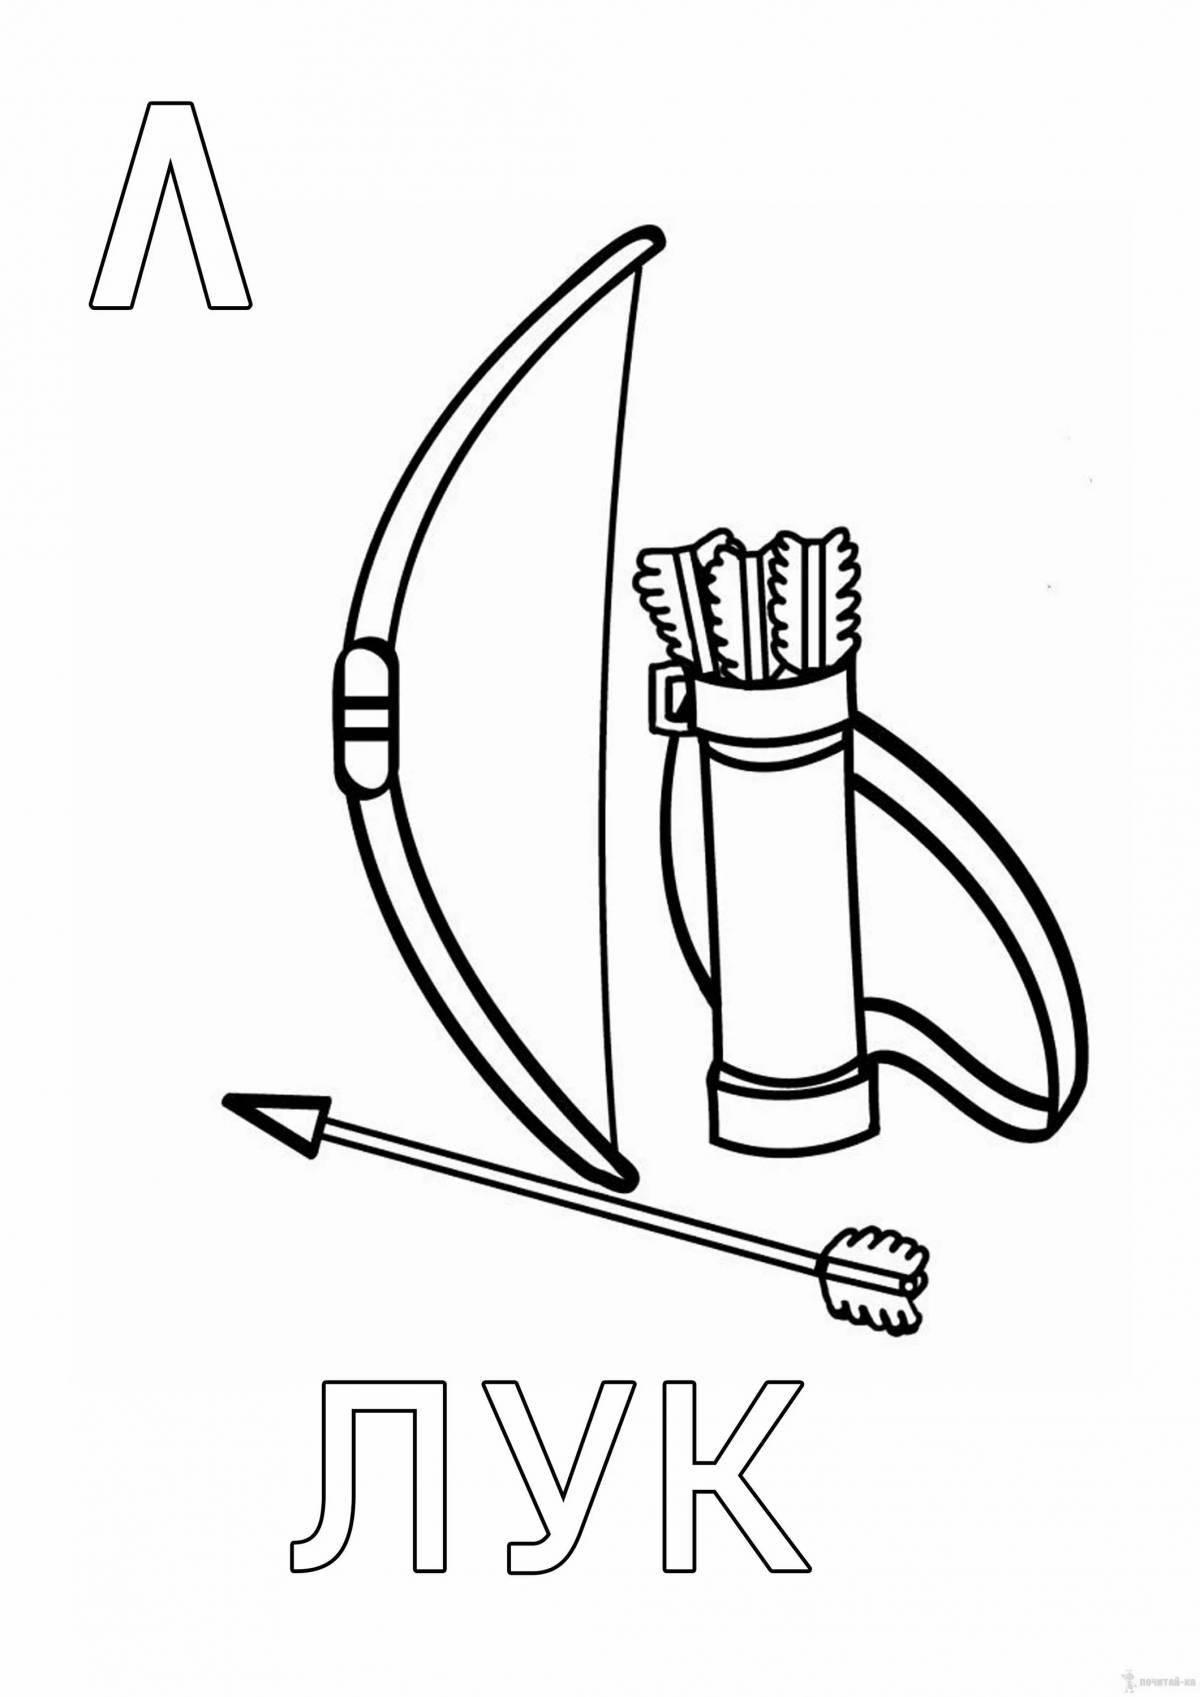 Exquisite bow and arrow coloring book